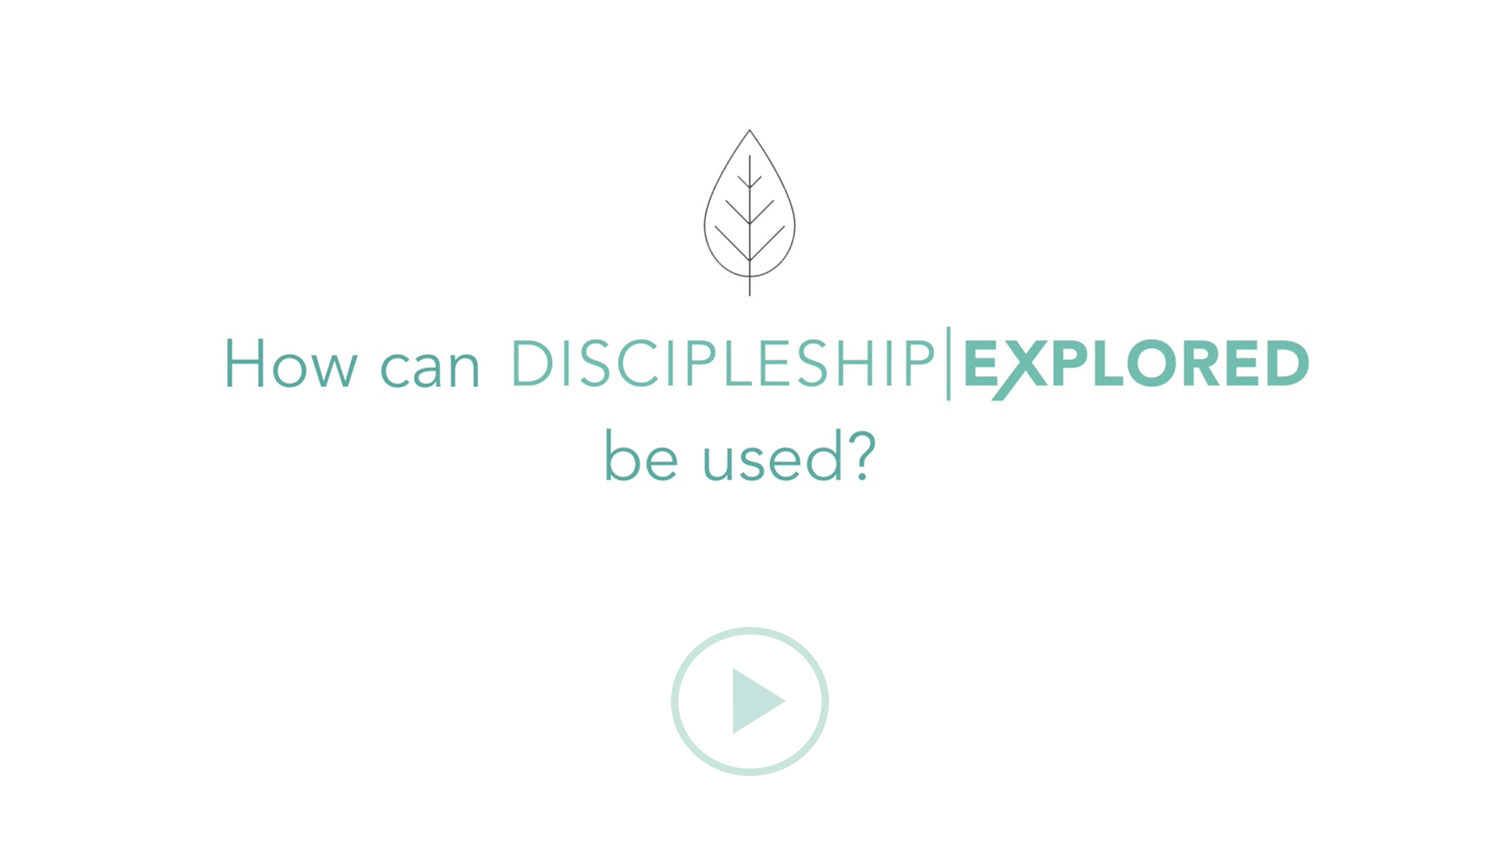 Question 3*How can Discipleship Explored be used?